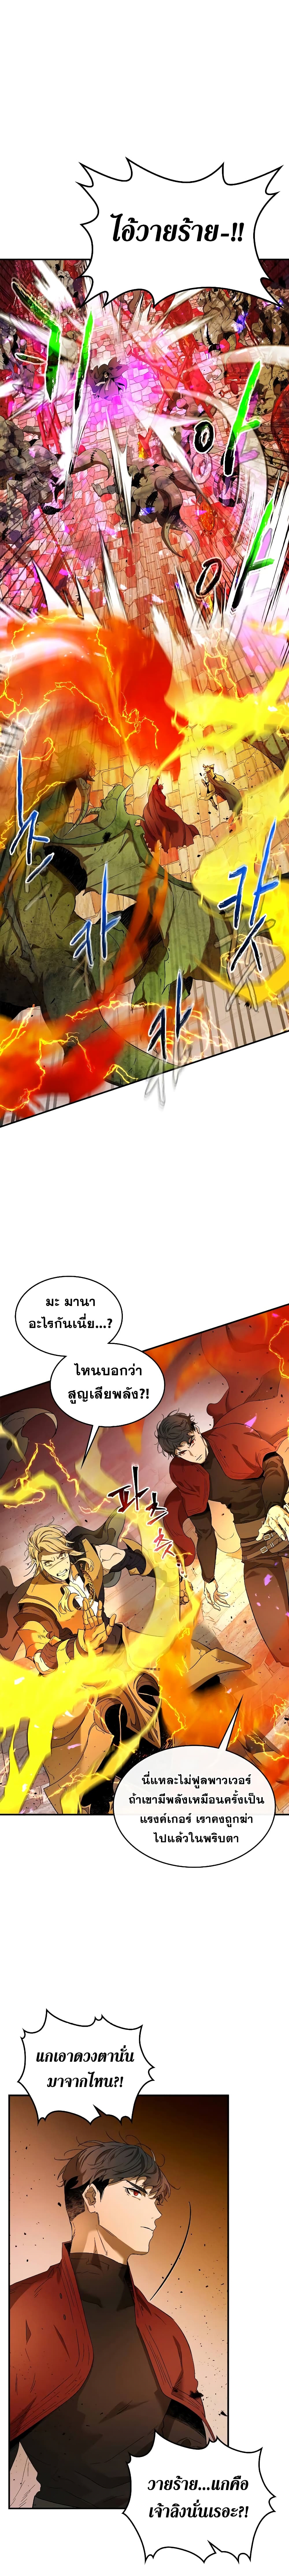 Leveling With The Gods21 (7)